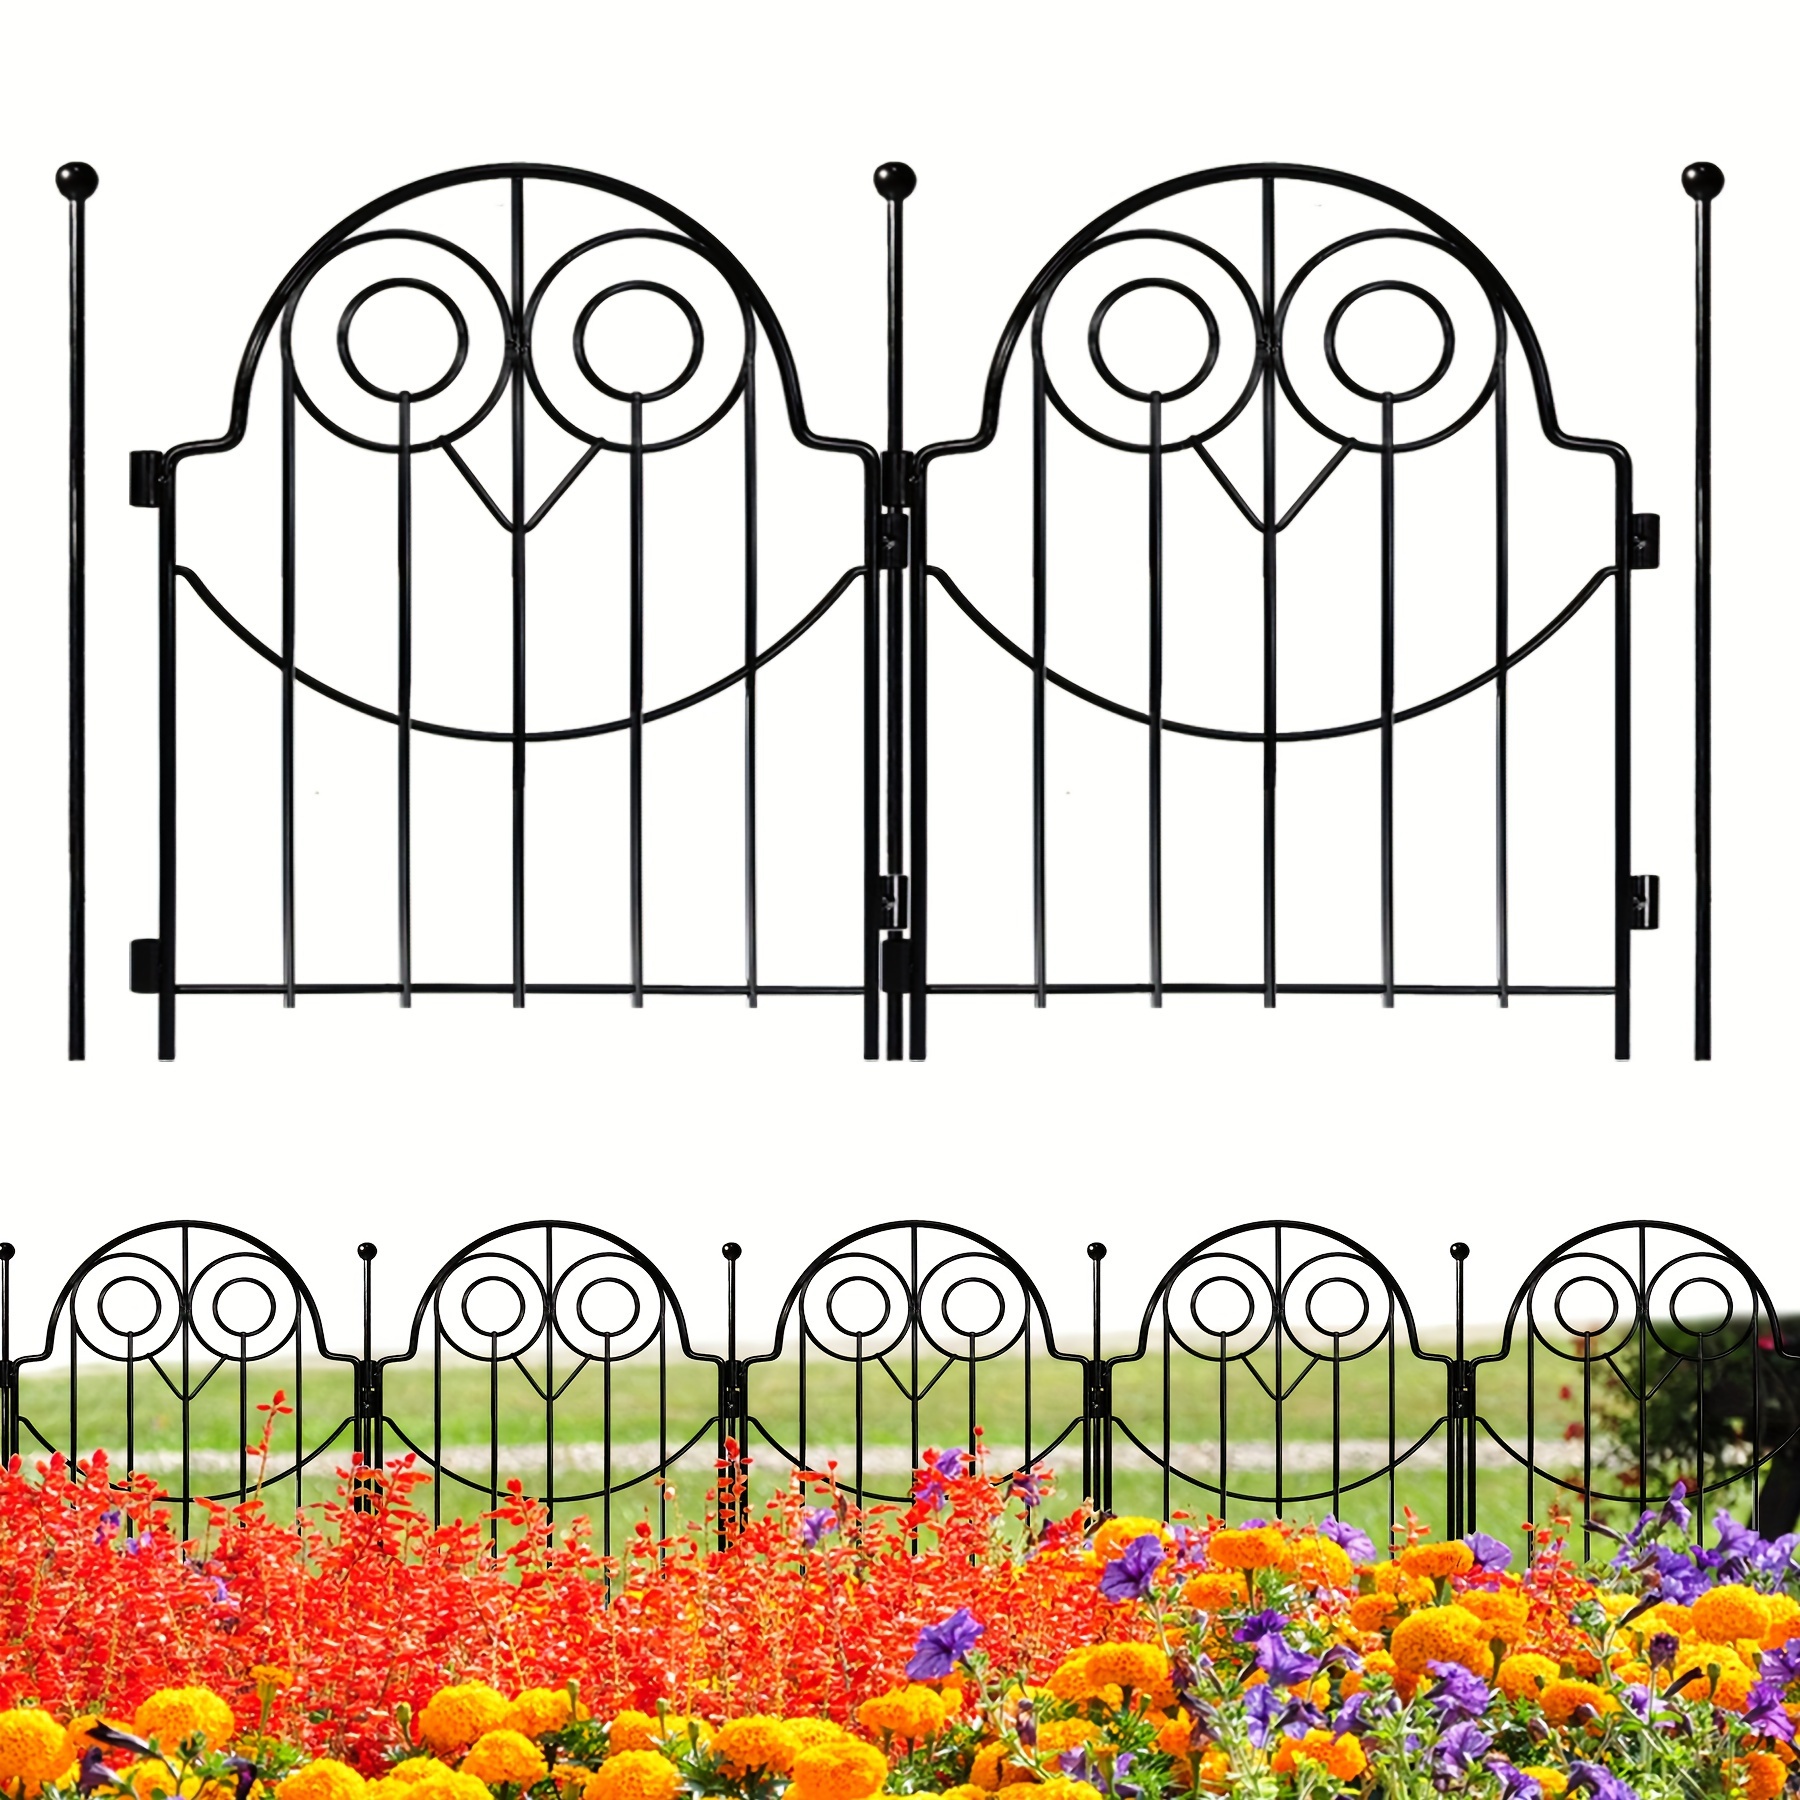 

1pc Decorative Garden Fence, 22 In (h) X 13 In (l) Chic Owl Shaped Rustproof Wire Garden Fencing Animal Barrier For Dogs, Outdoor Landscaping Decor For Patio And Yard Flower Edging